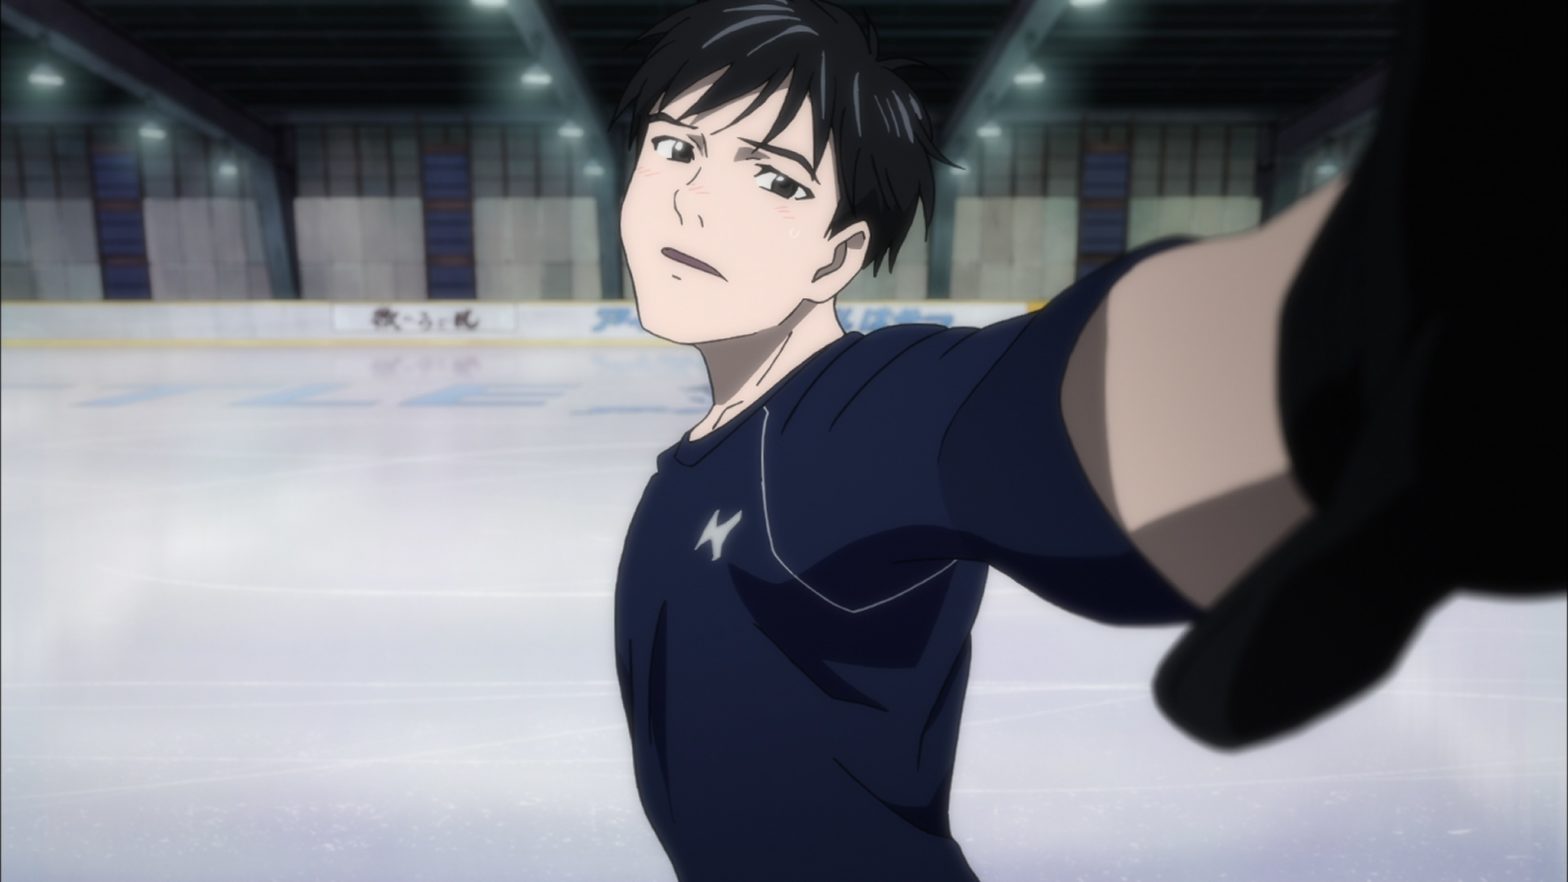 Yuri on ice promo image for top 10 sports anime of all time review by otherworlds inc